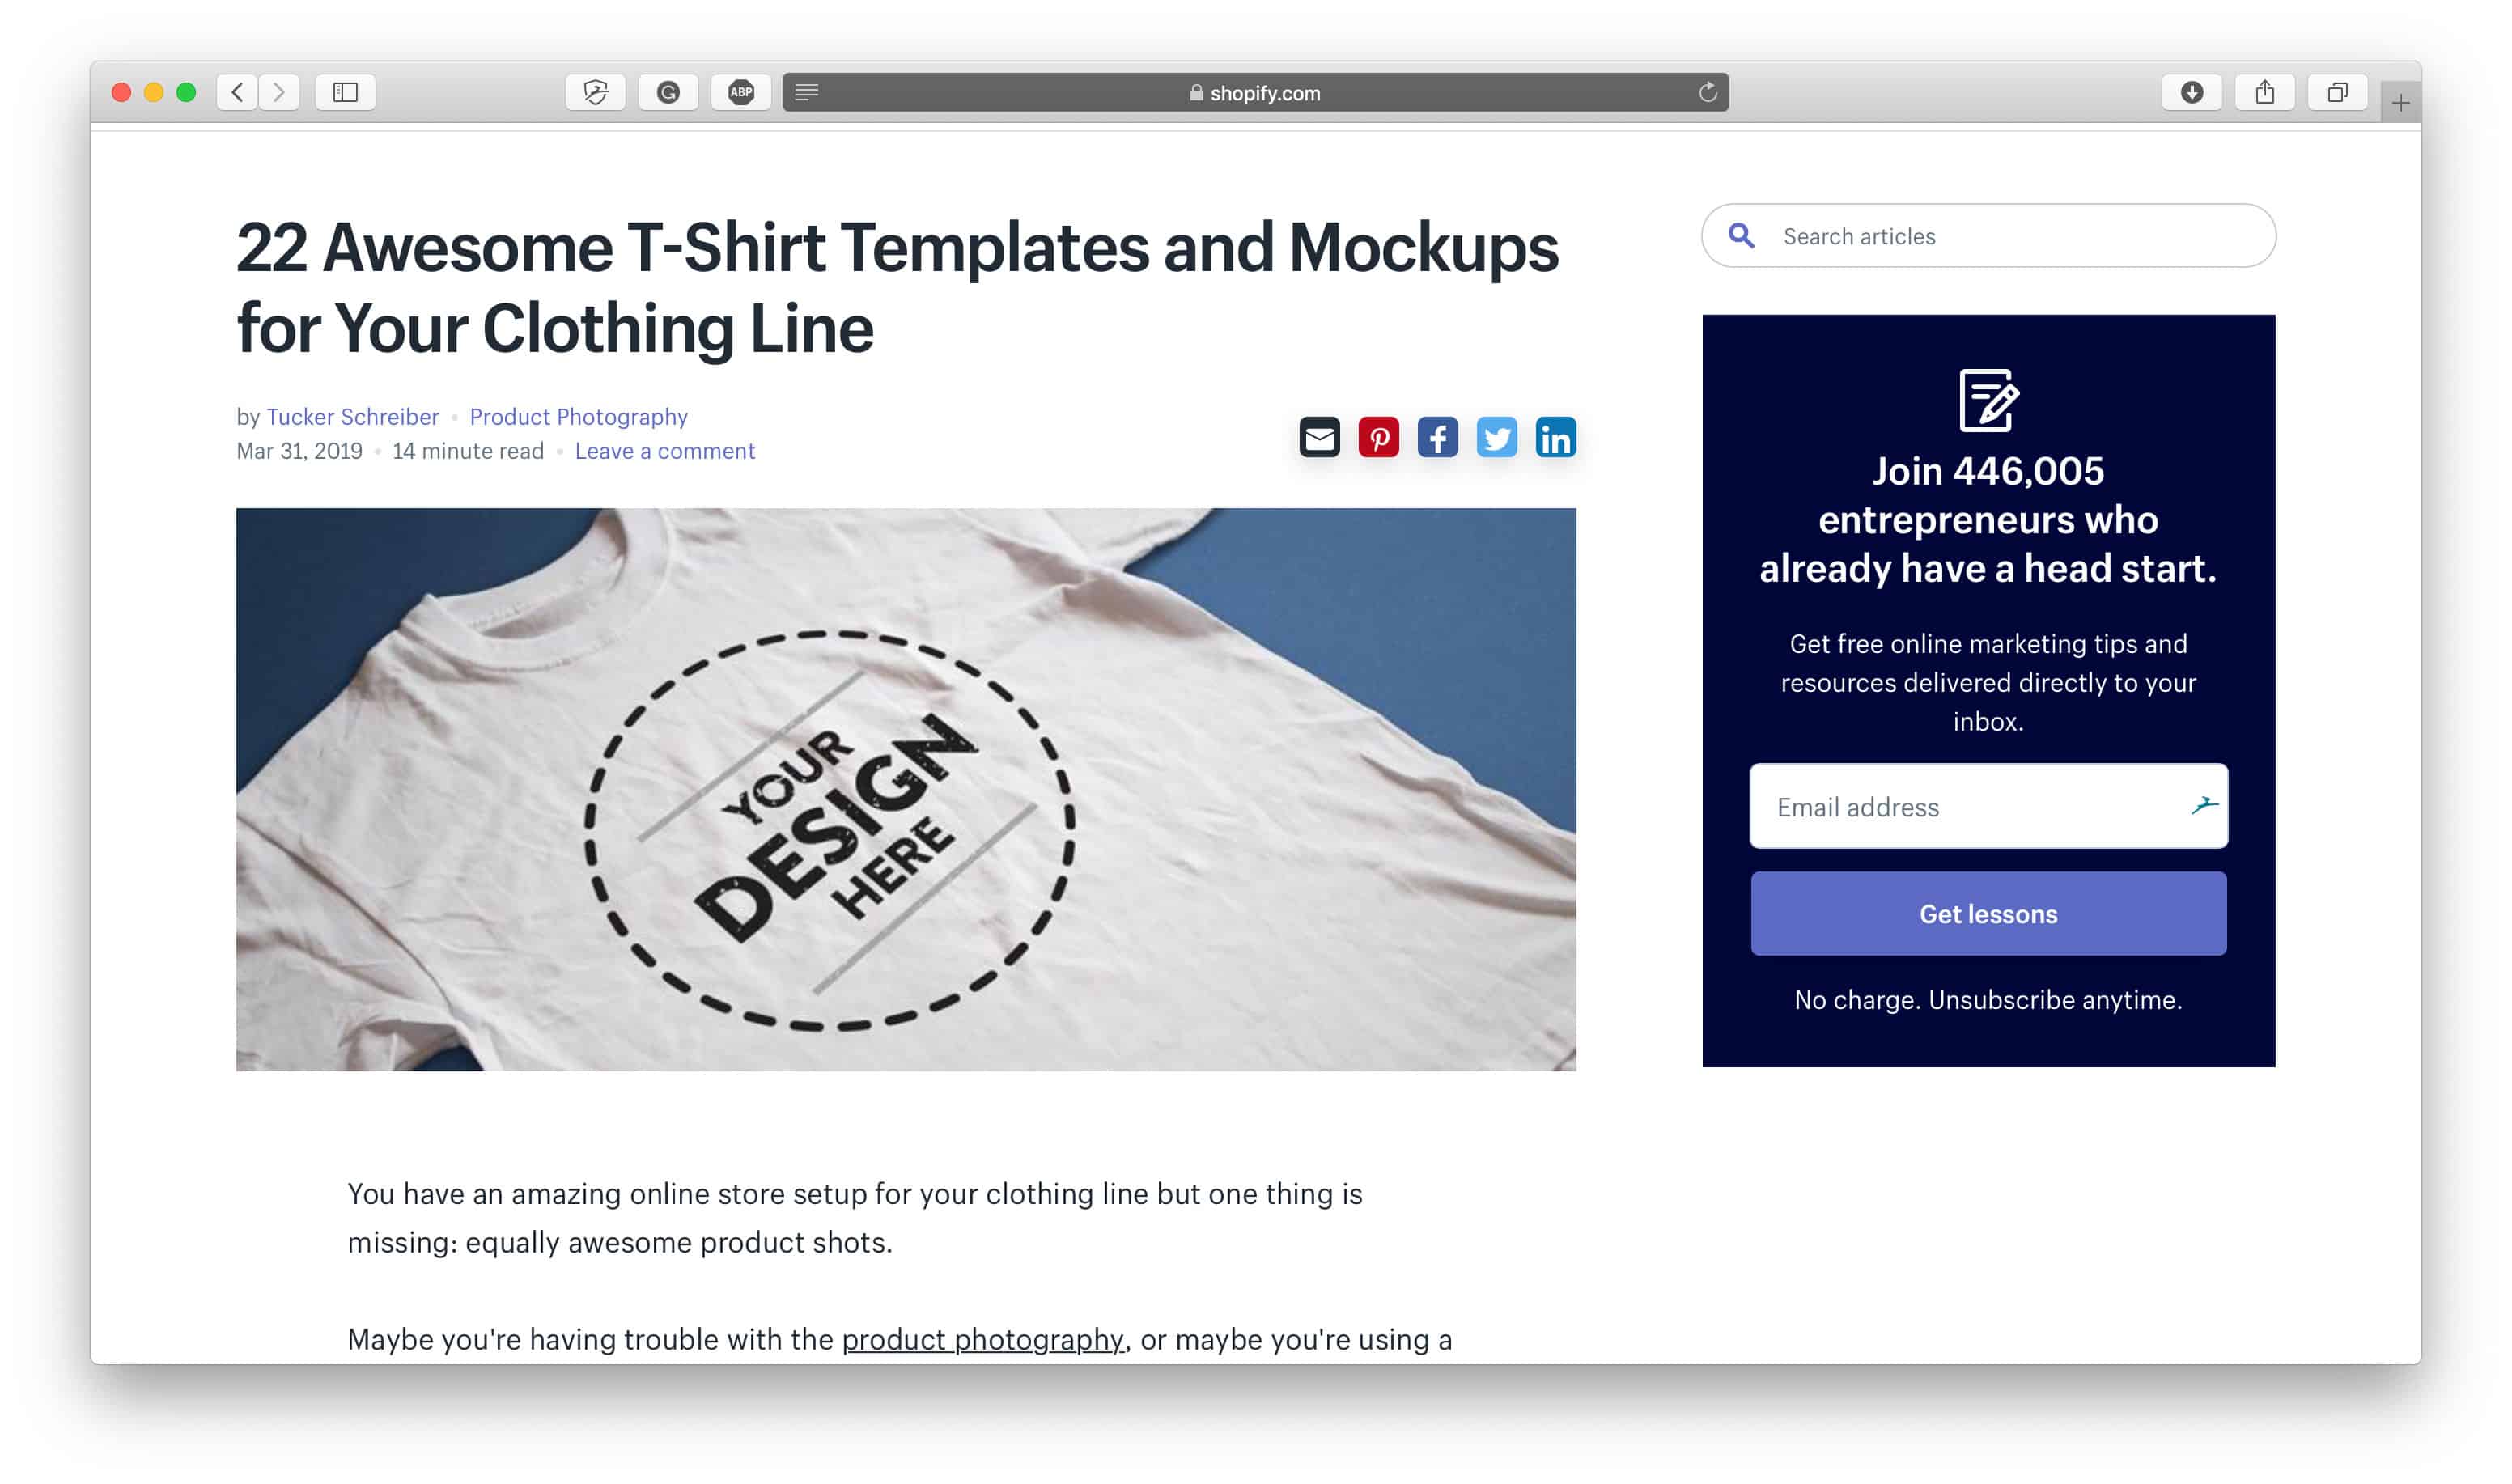 Best T-Shirt Templates and Mockups